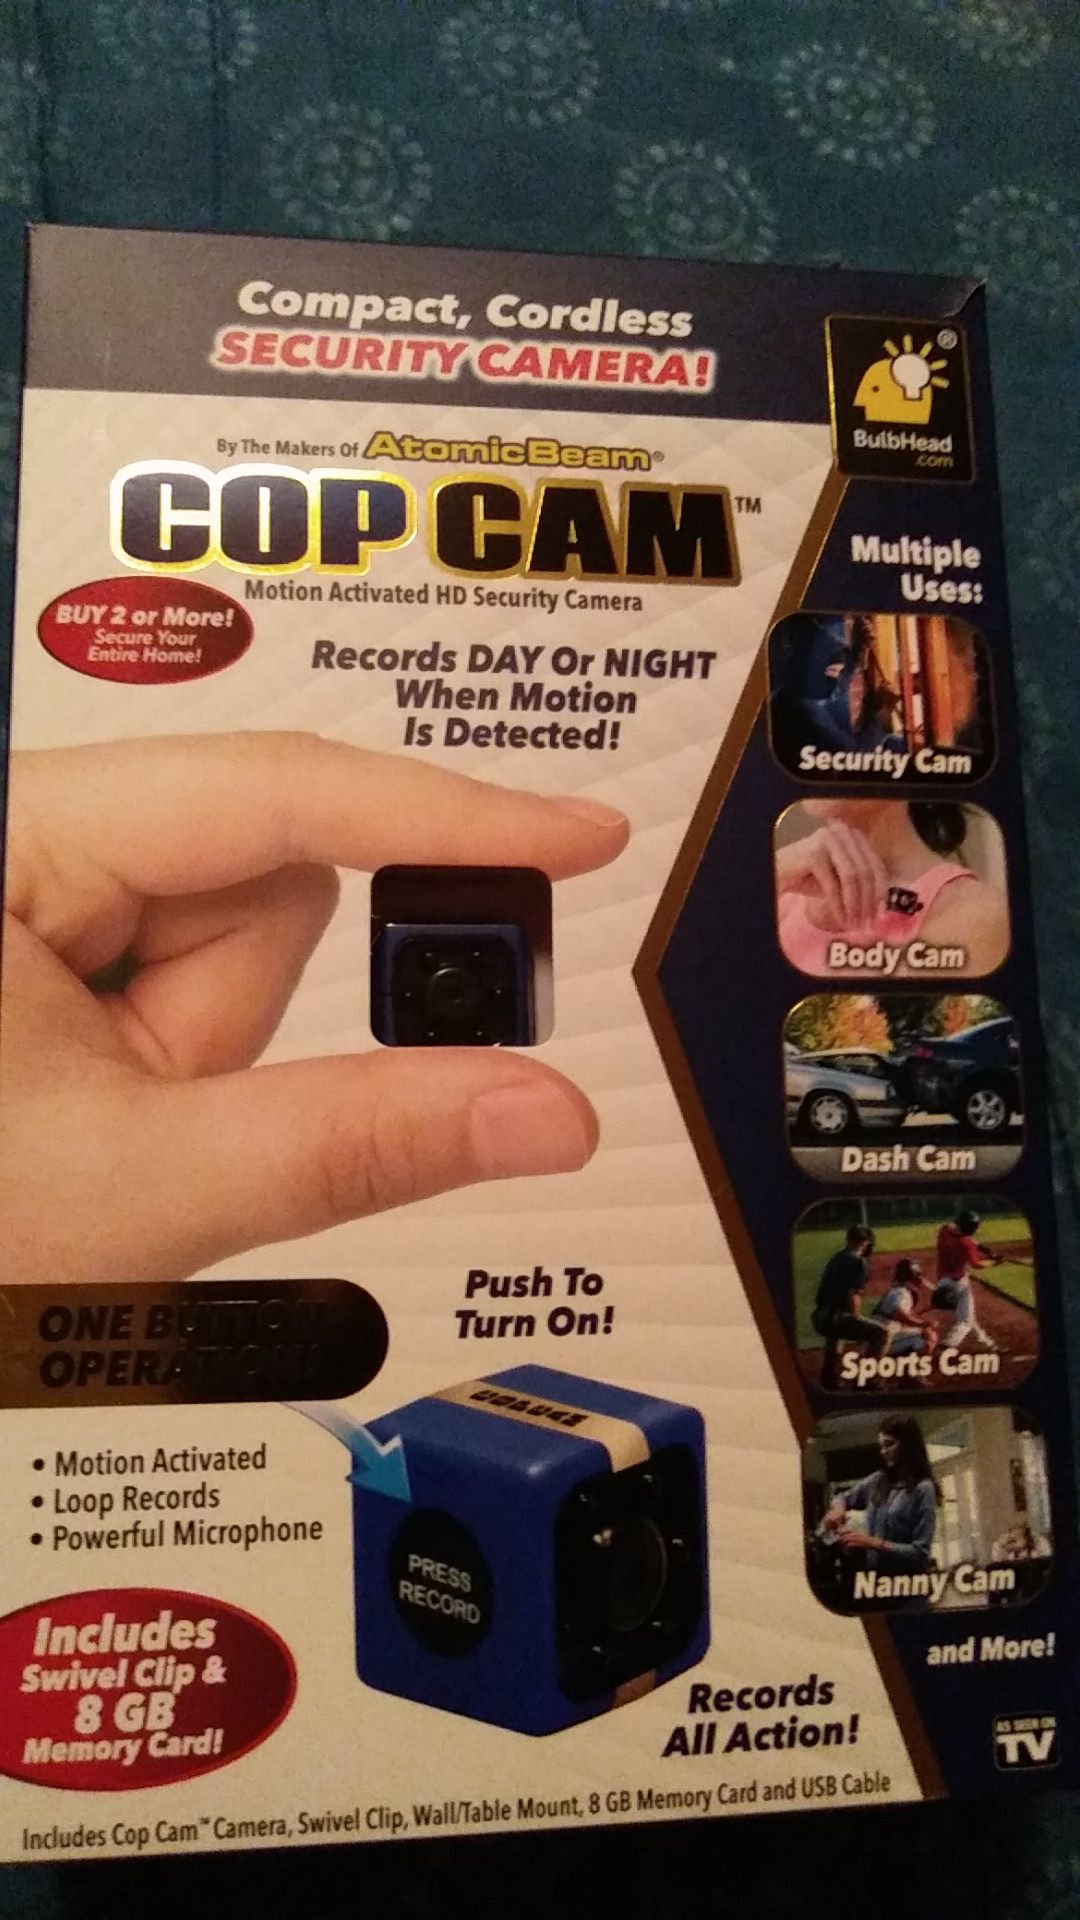 Cop cam motion activated HD camera